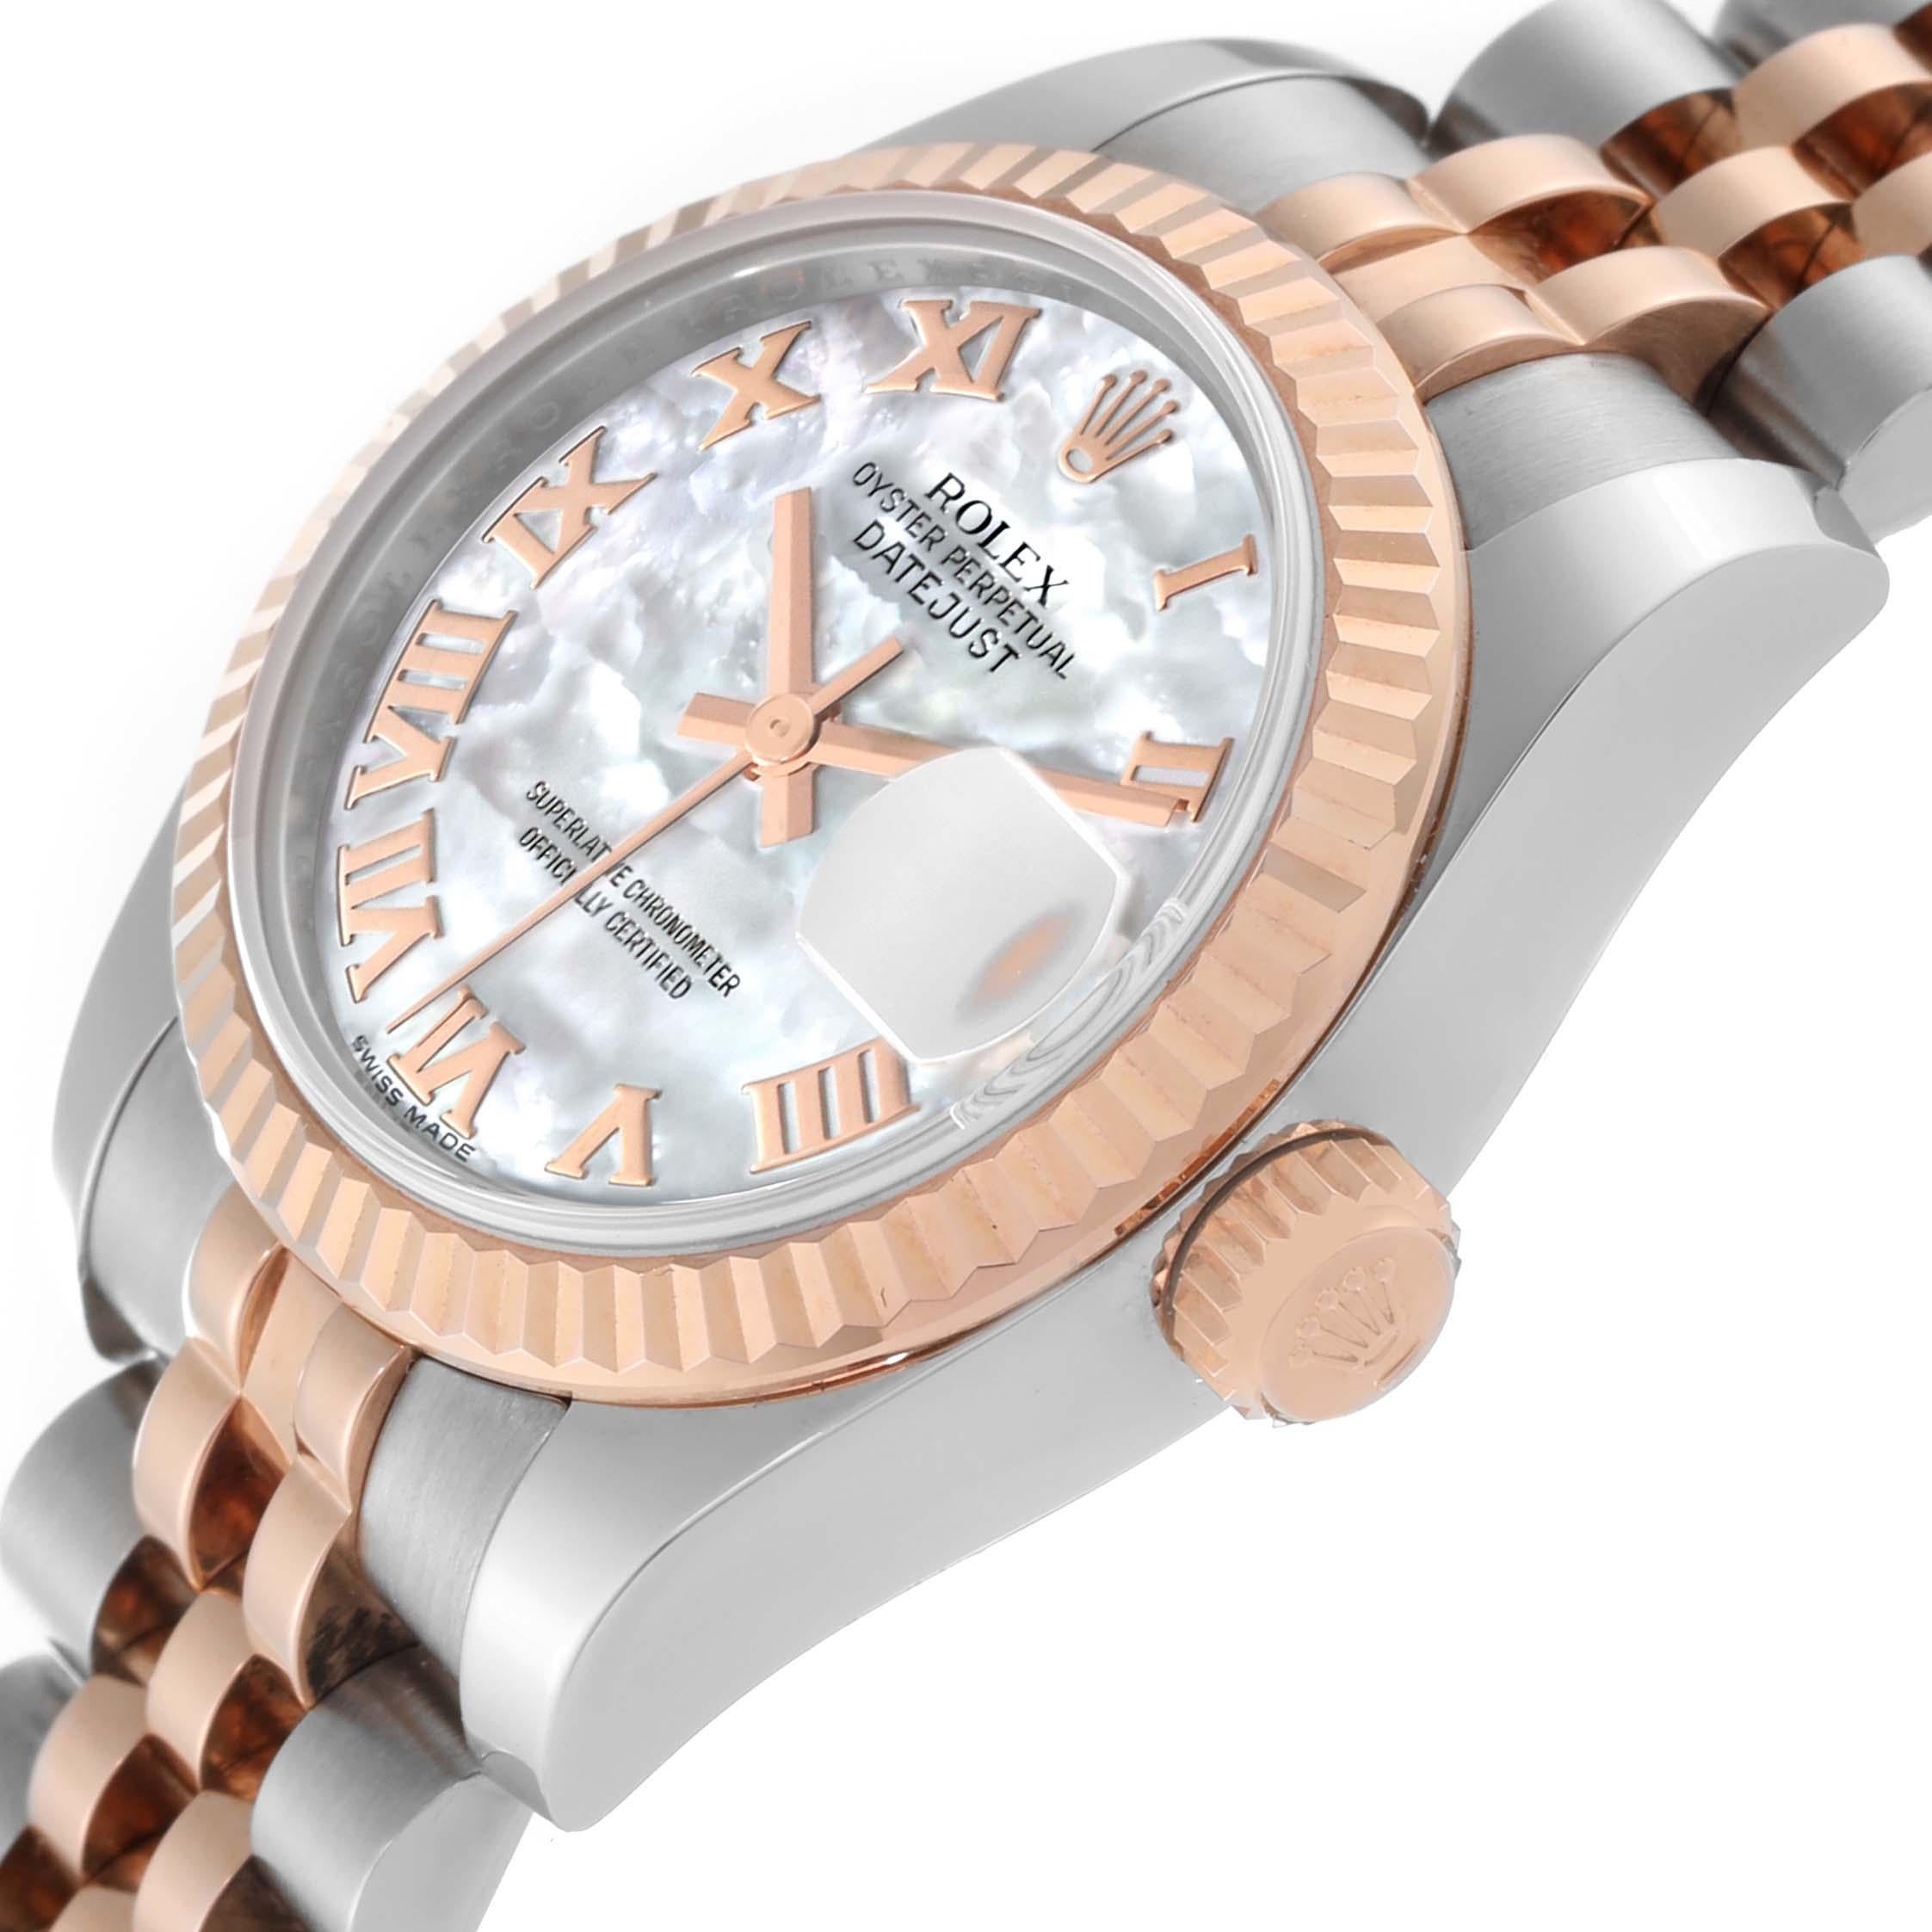 Rolex Datejust Steel Rose Gold Mother of Pearl Dial Ladies Watch 179171 For Sale 6